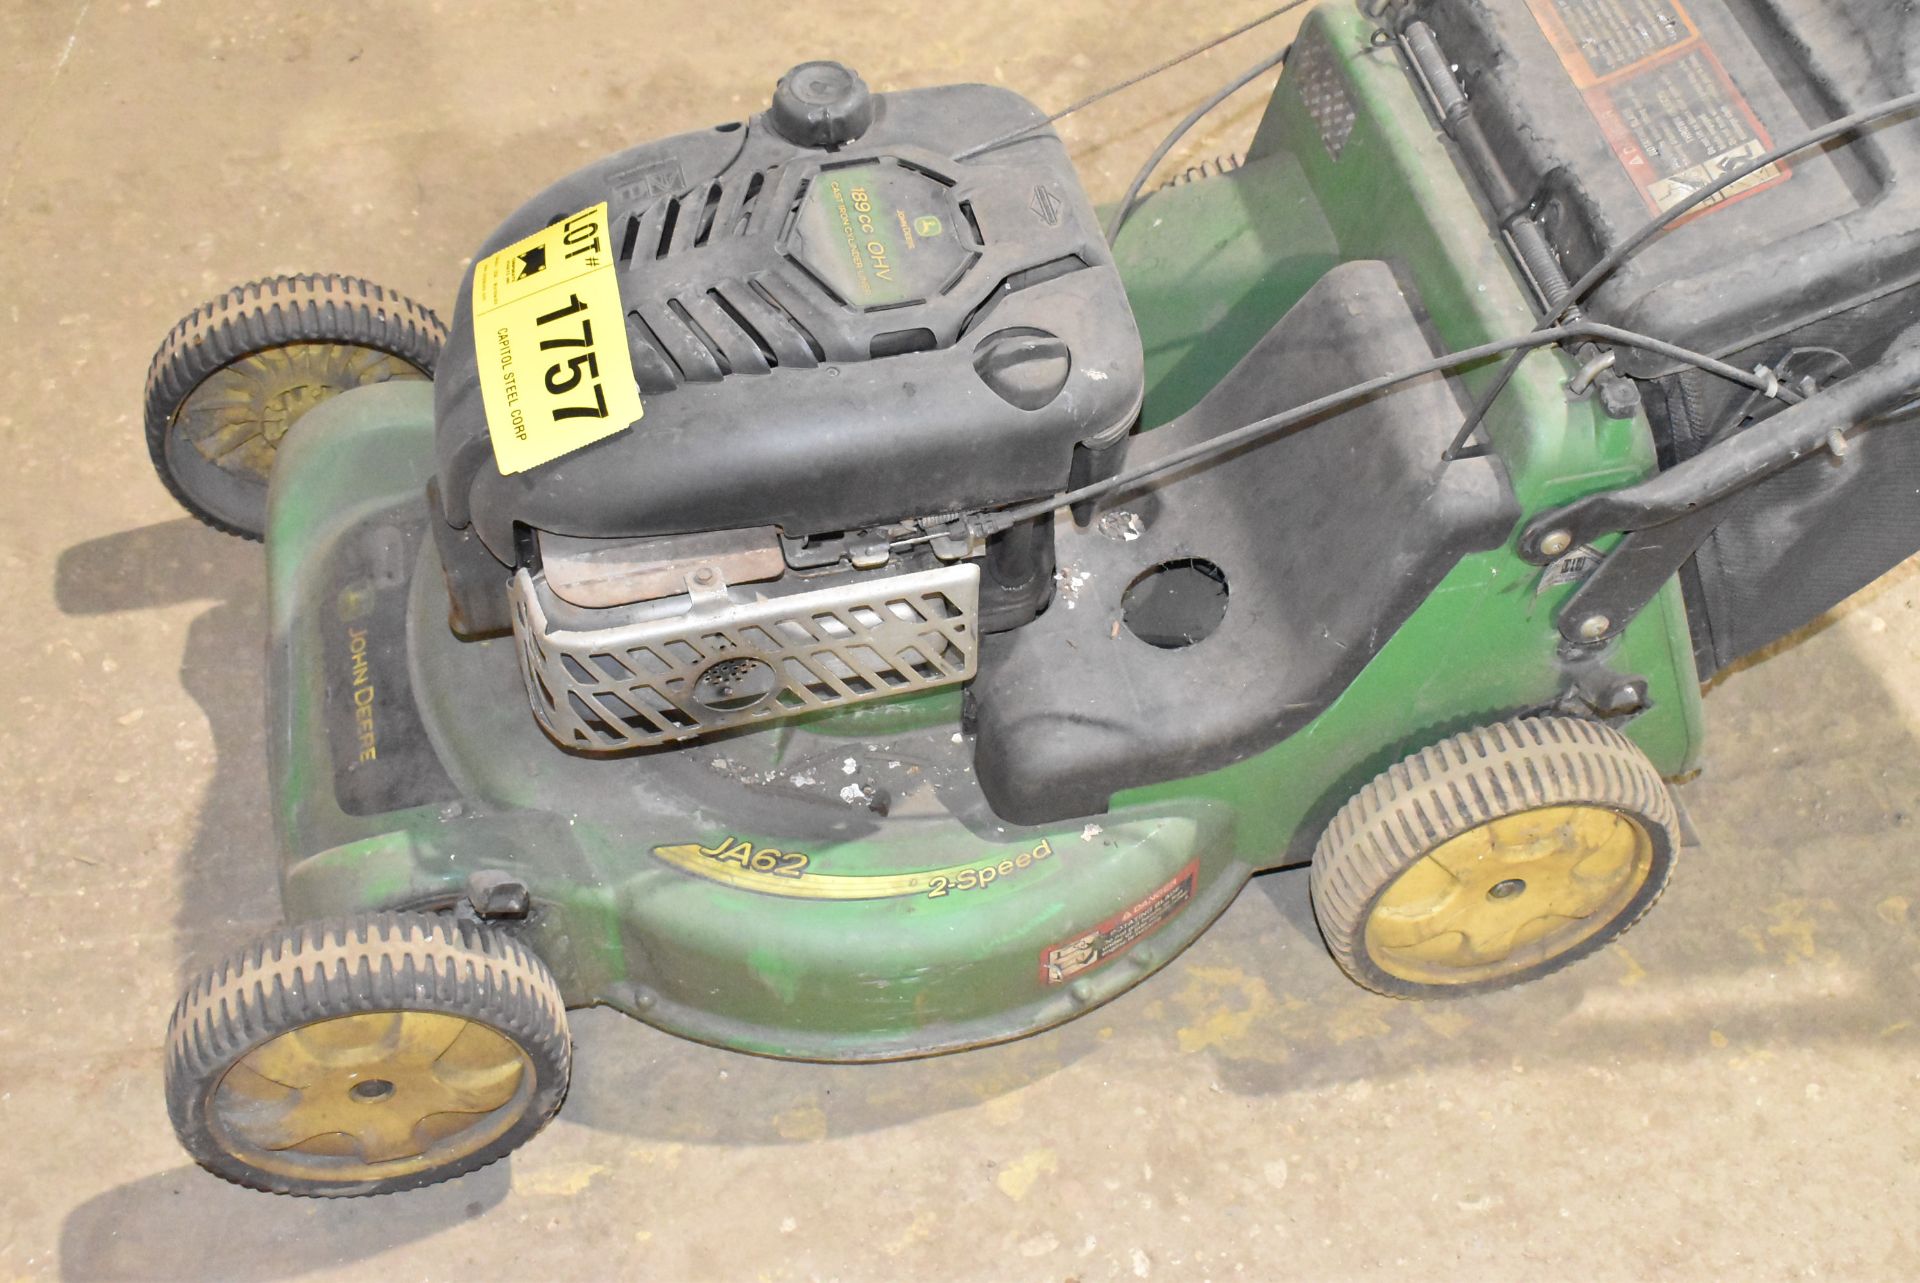 JOHN DEERE GAS POWERED LAWN MOWER [RIGGING FEES FOR LOT #1757 - $30 USD PLUS APPLICABLE TAXES] - Image 4 of 5